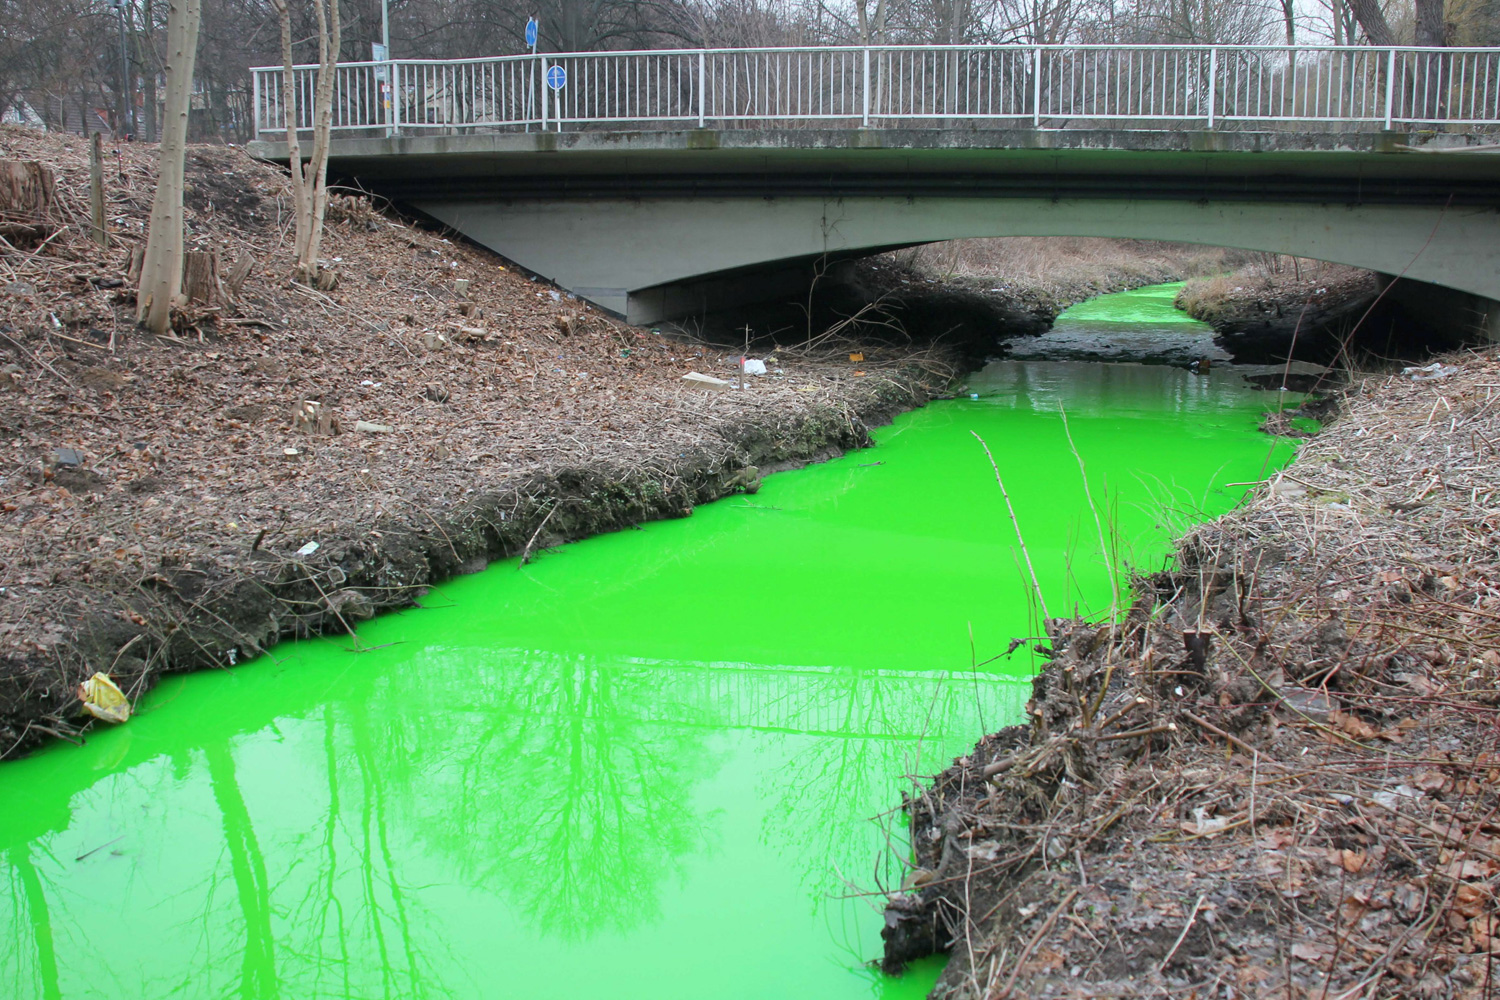 March 2, 2012. The water of the Grone stream has turned green after a fire in Goettingen, Germany.